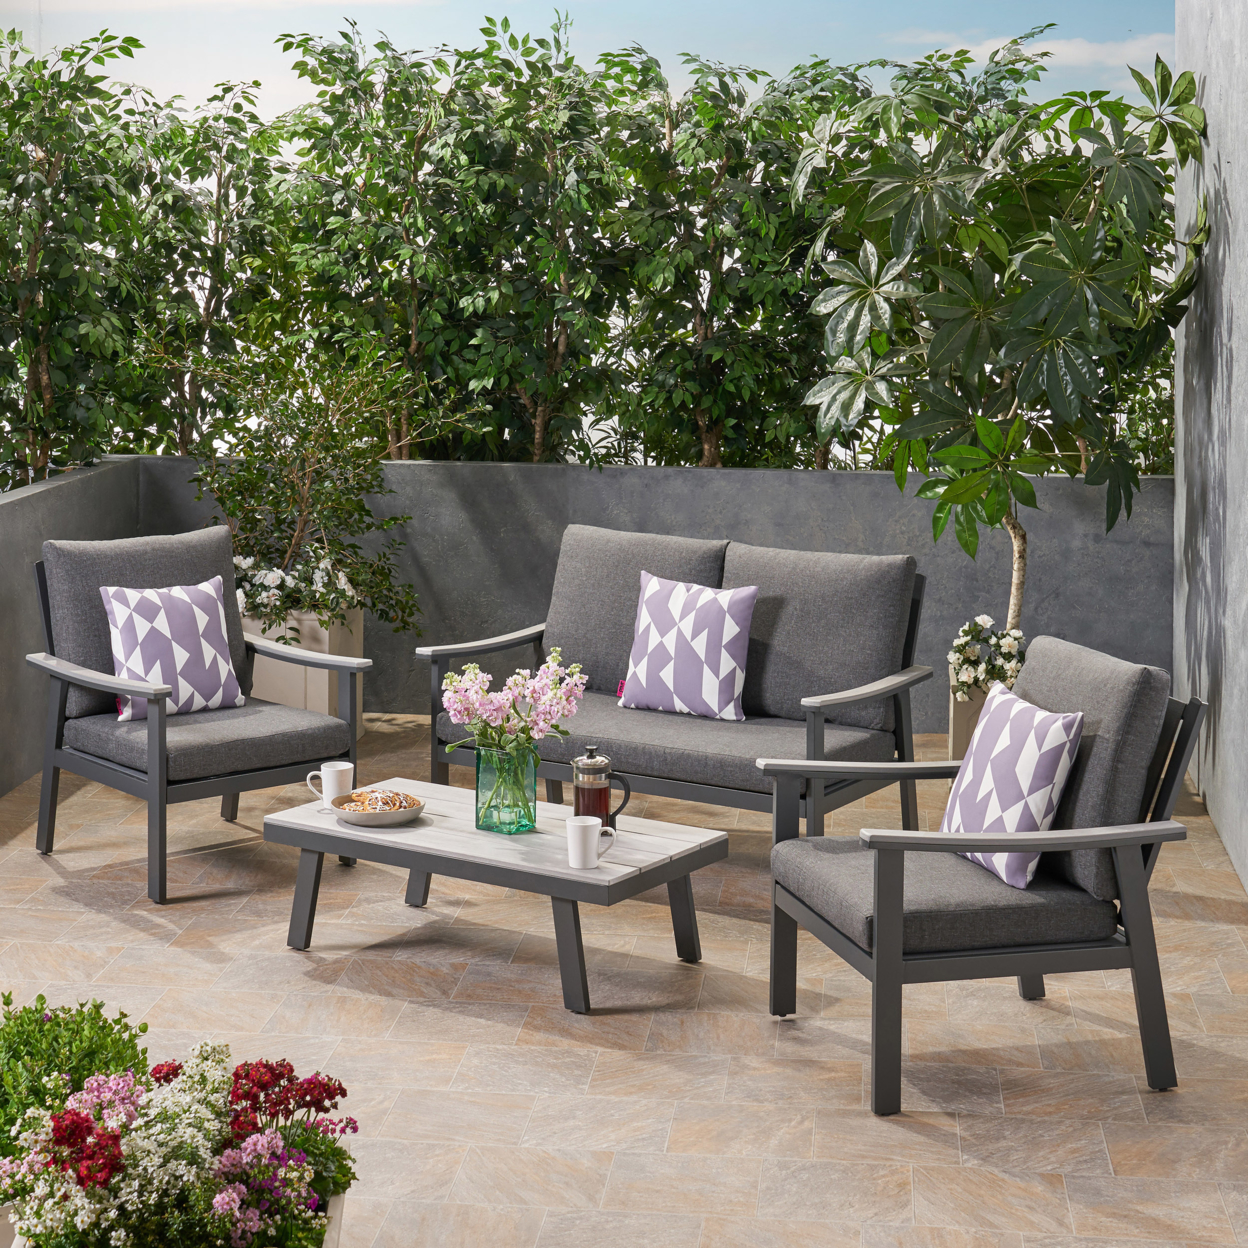 Agnes Outdoor 4 Piece Aluminum And Faux Wood Chat Set With Cushions - Gray, Natural Finish, Gray